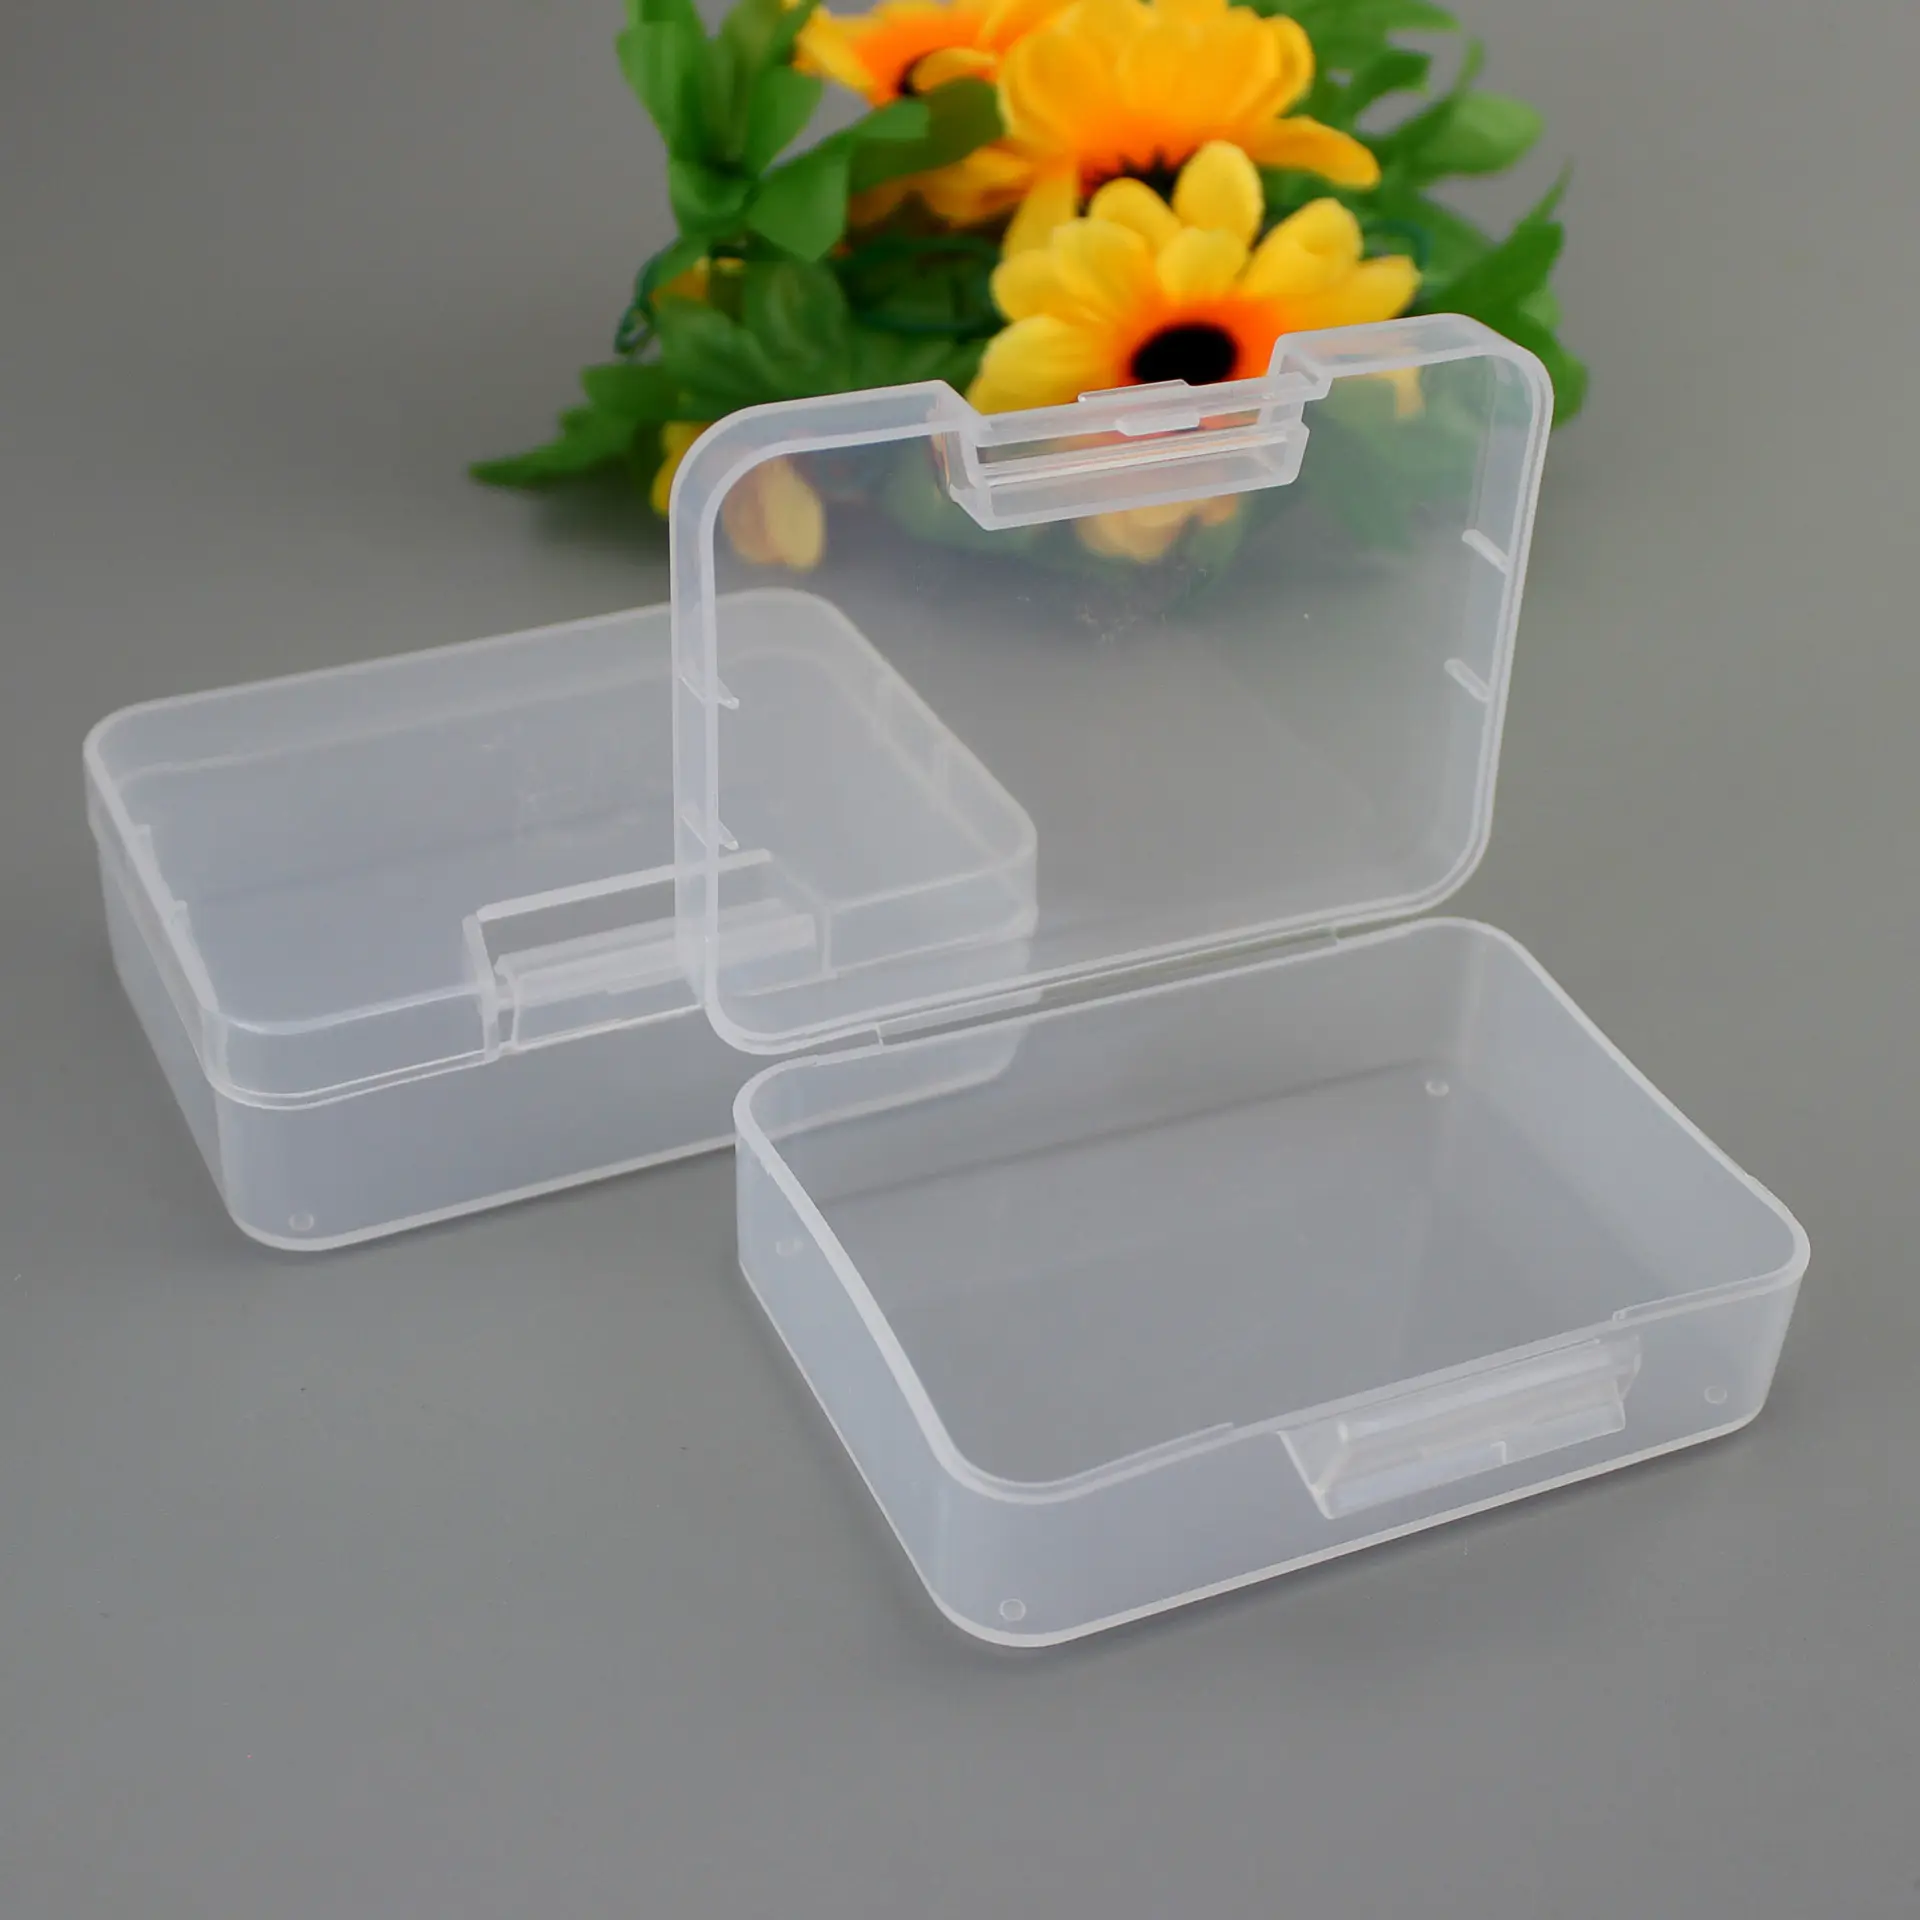 Screw Case Beads Container New Clear Lidded Small Plastic Box for Trifles Parts Manicure Tools Storage Box